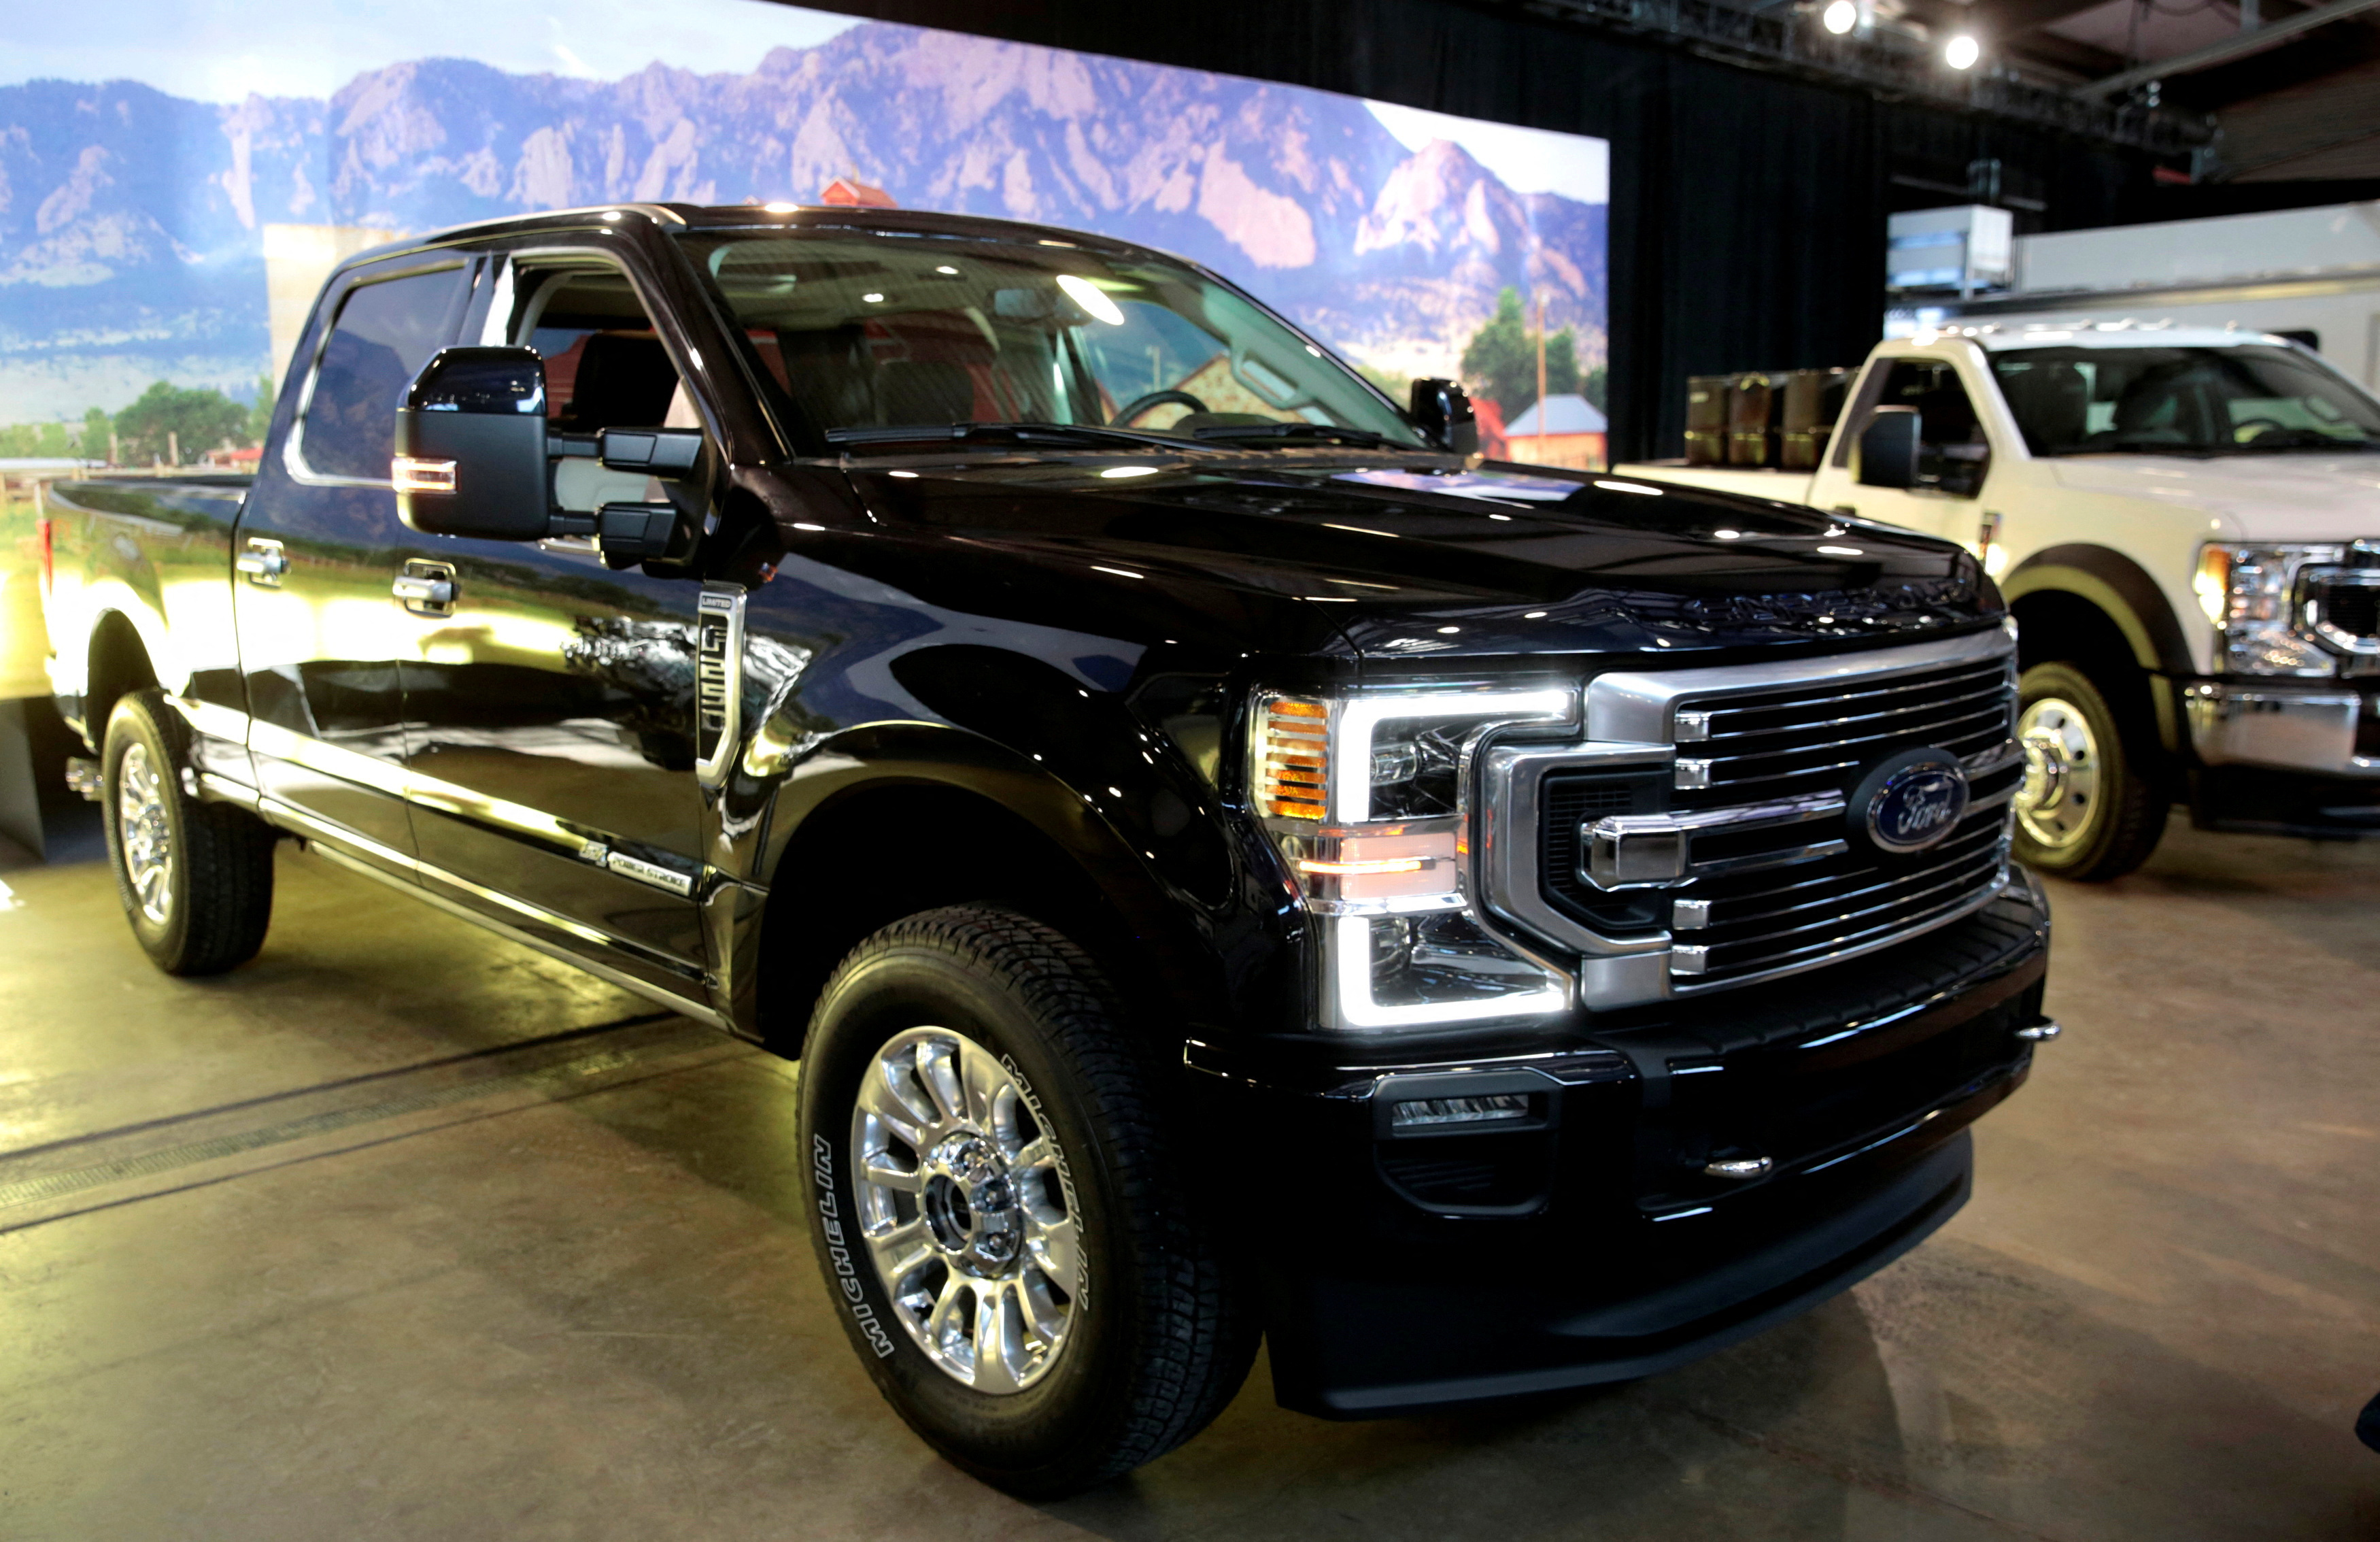 Ford Motor Co. displays its new 2020 F-Series Super Duty pickup truck in Detroit,